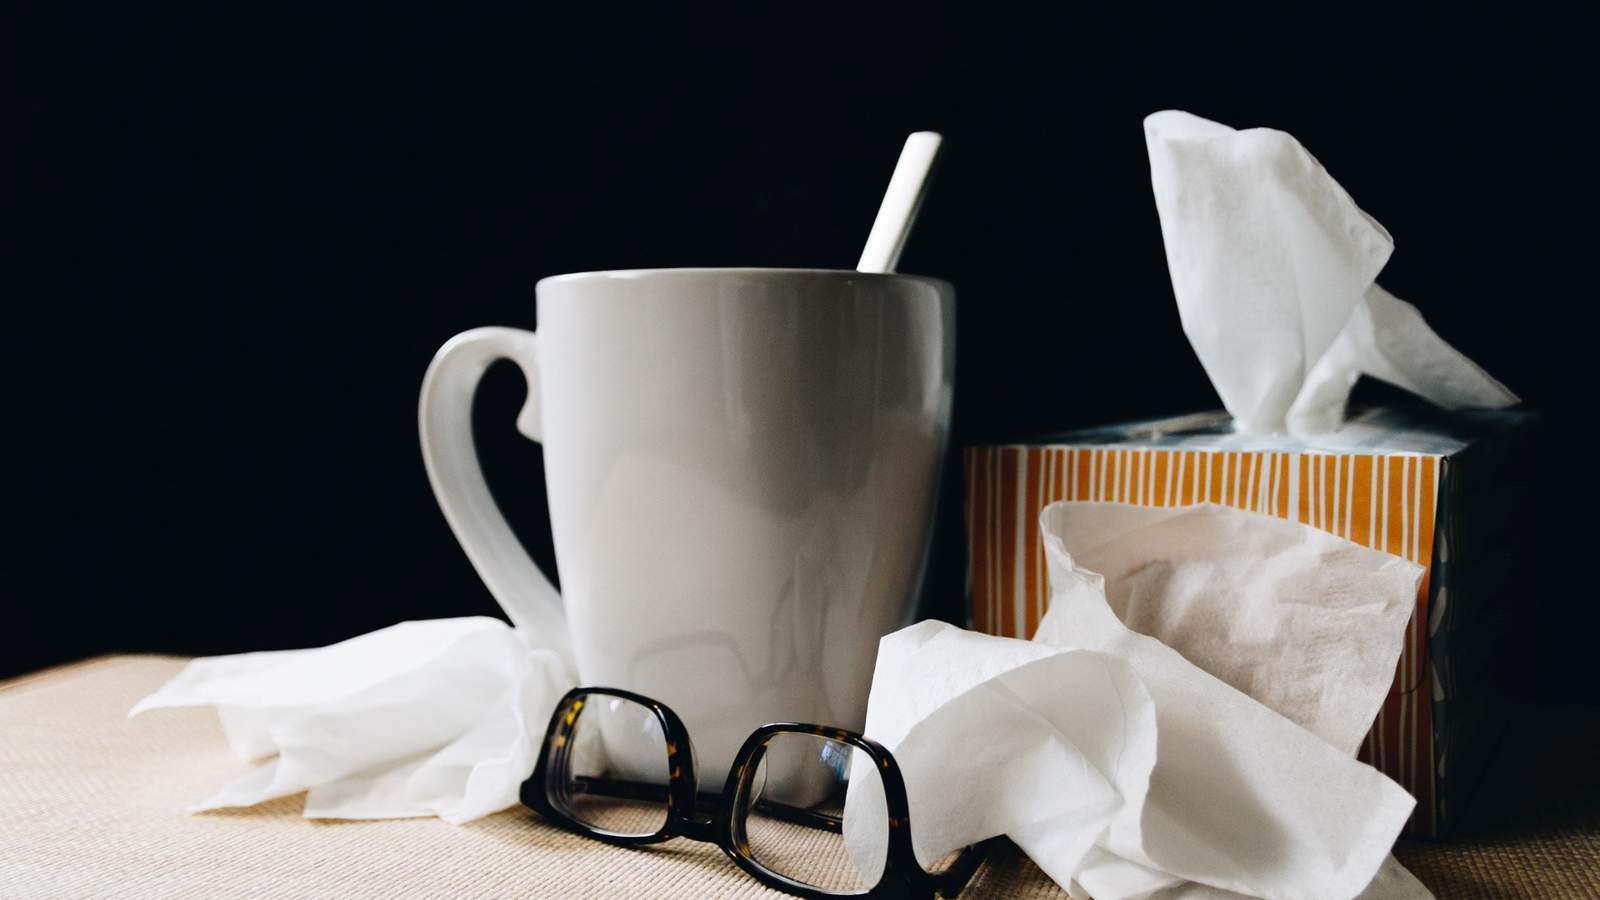 Here are important facts about the flu